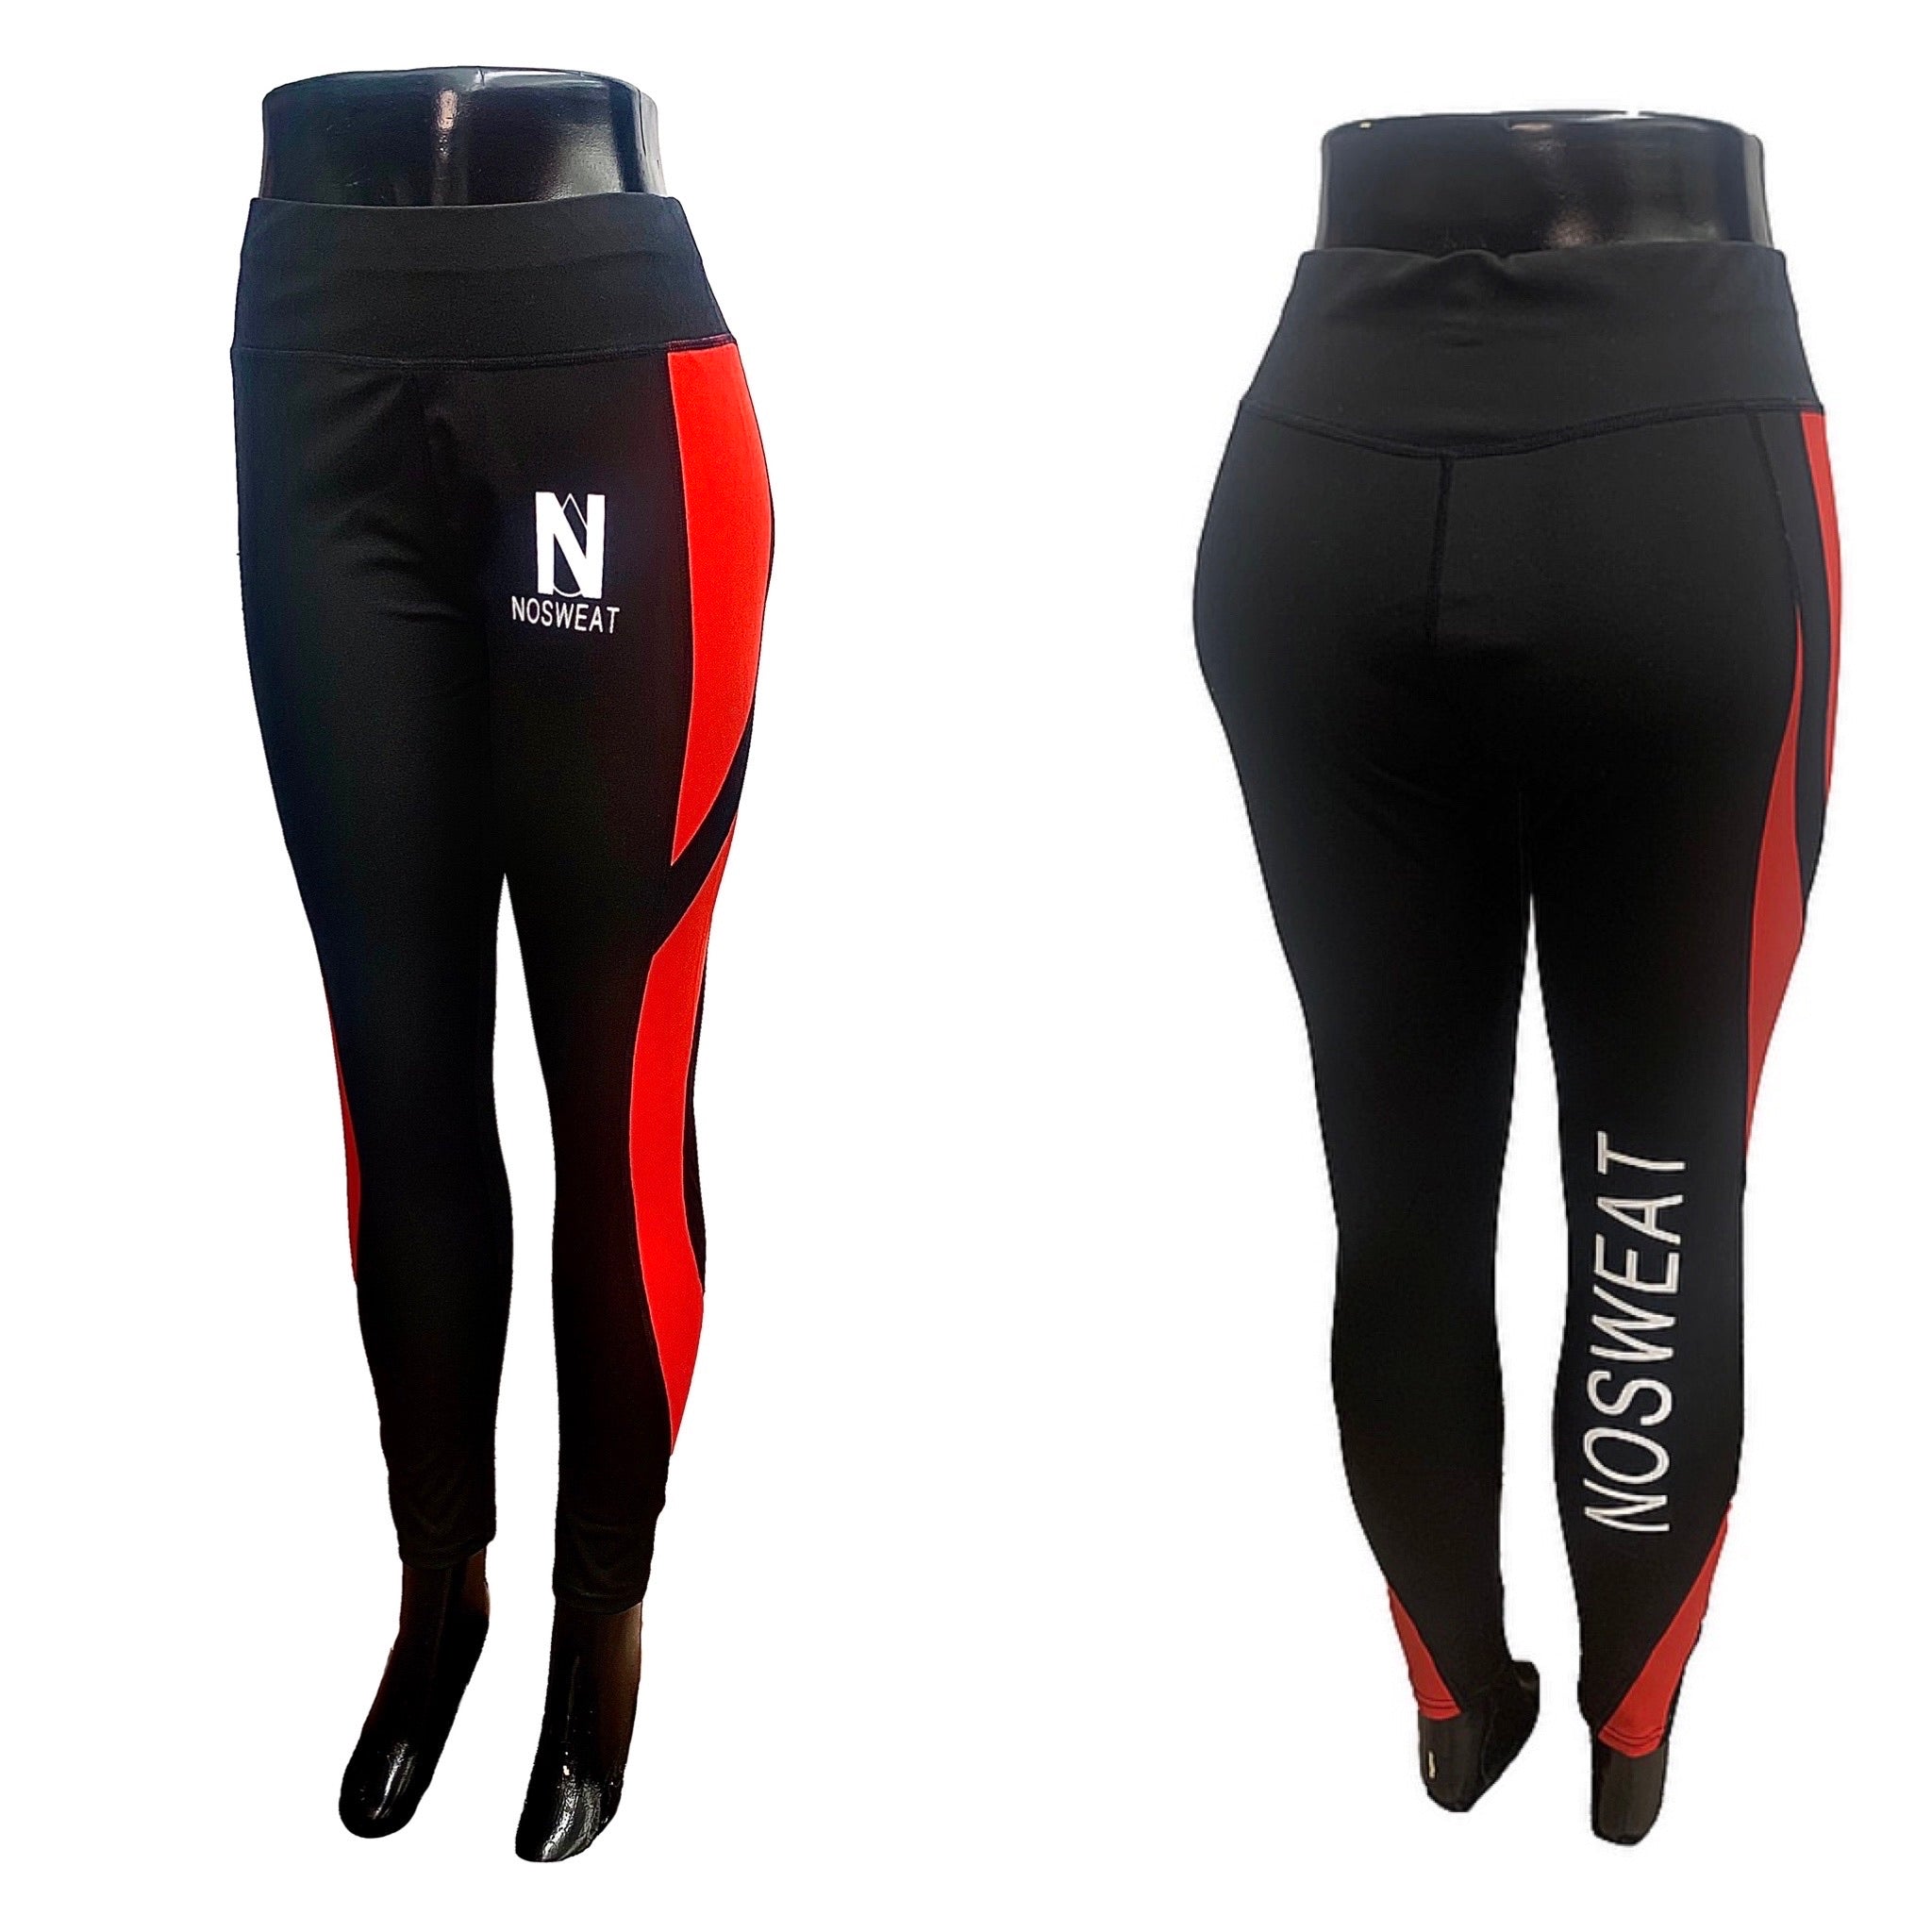 Women’s Nosweat Black and Red Leggings